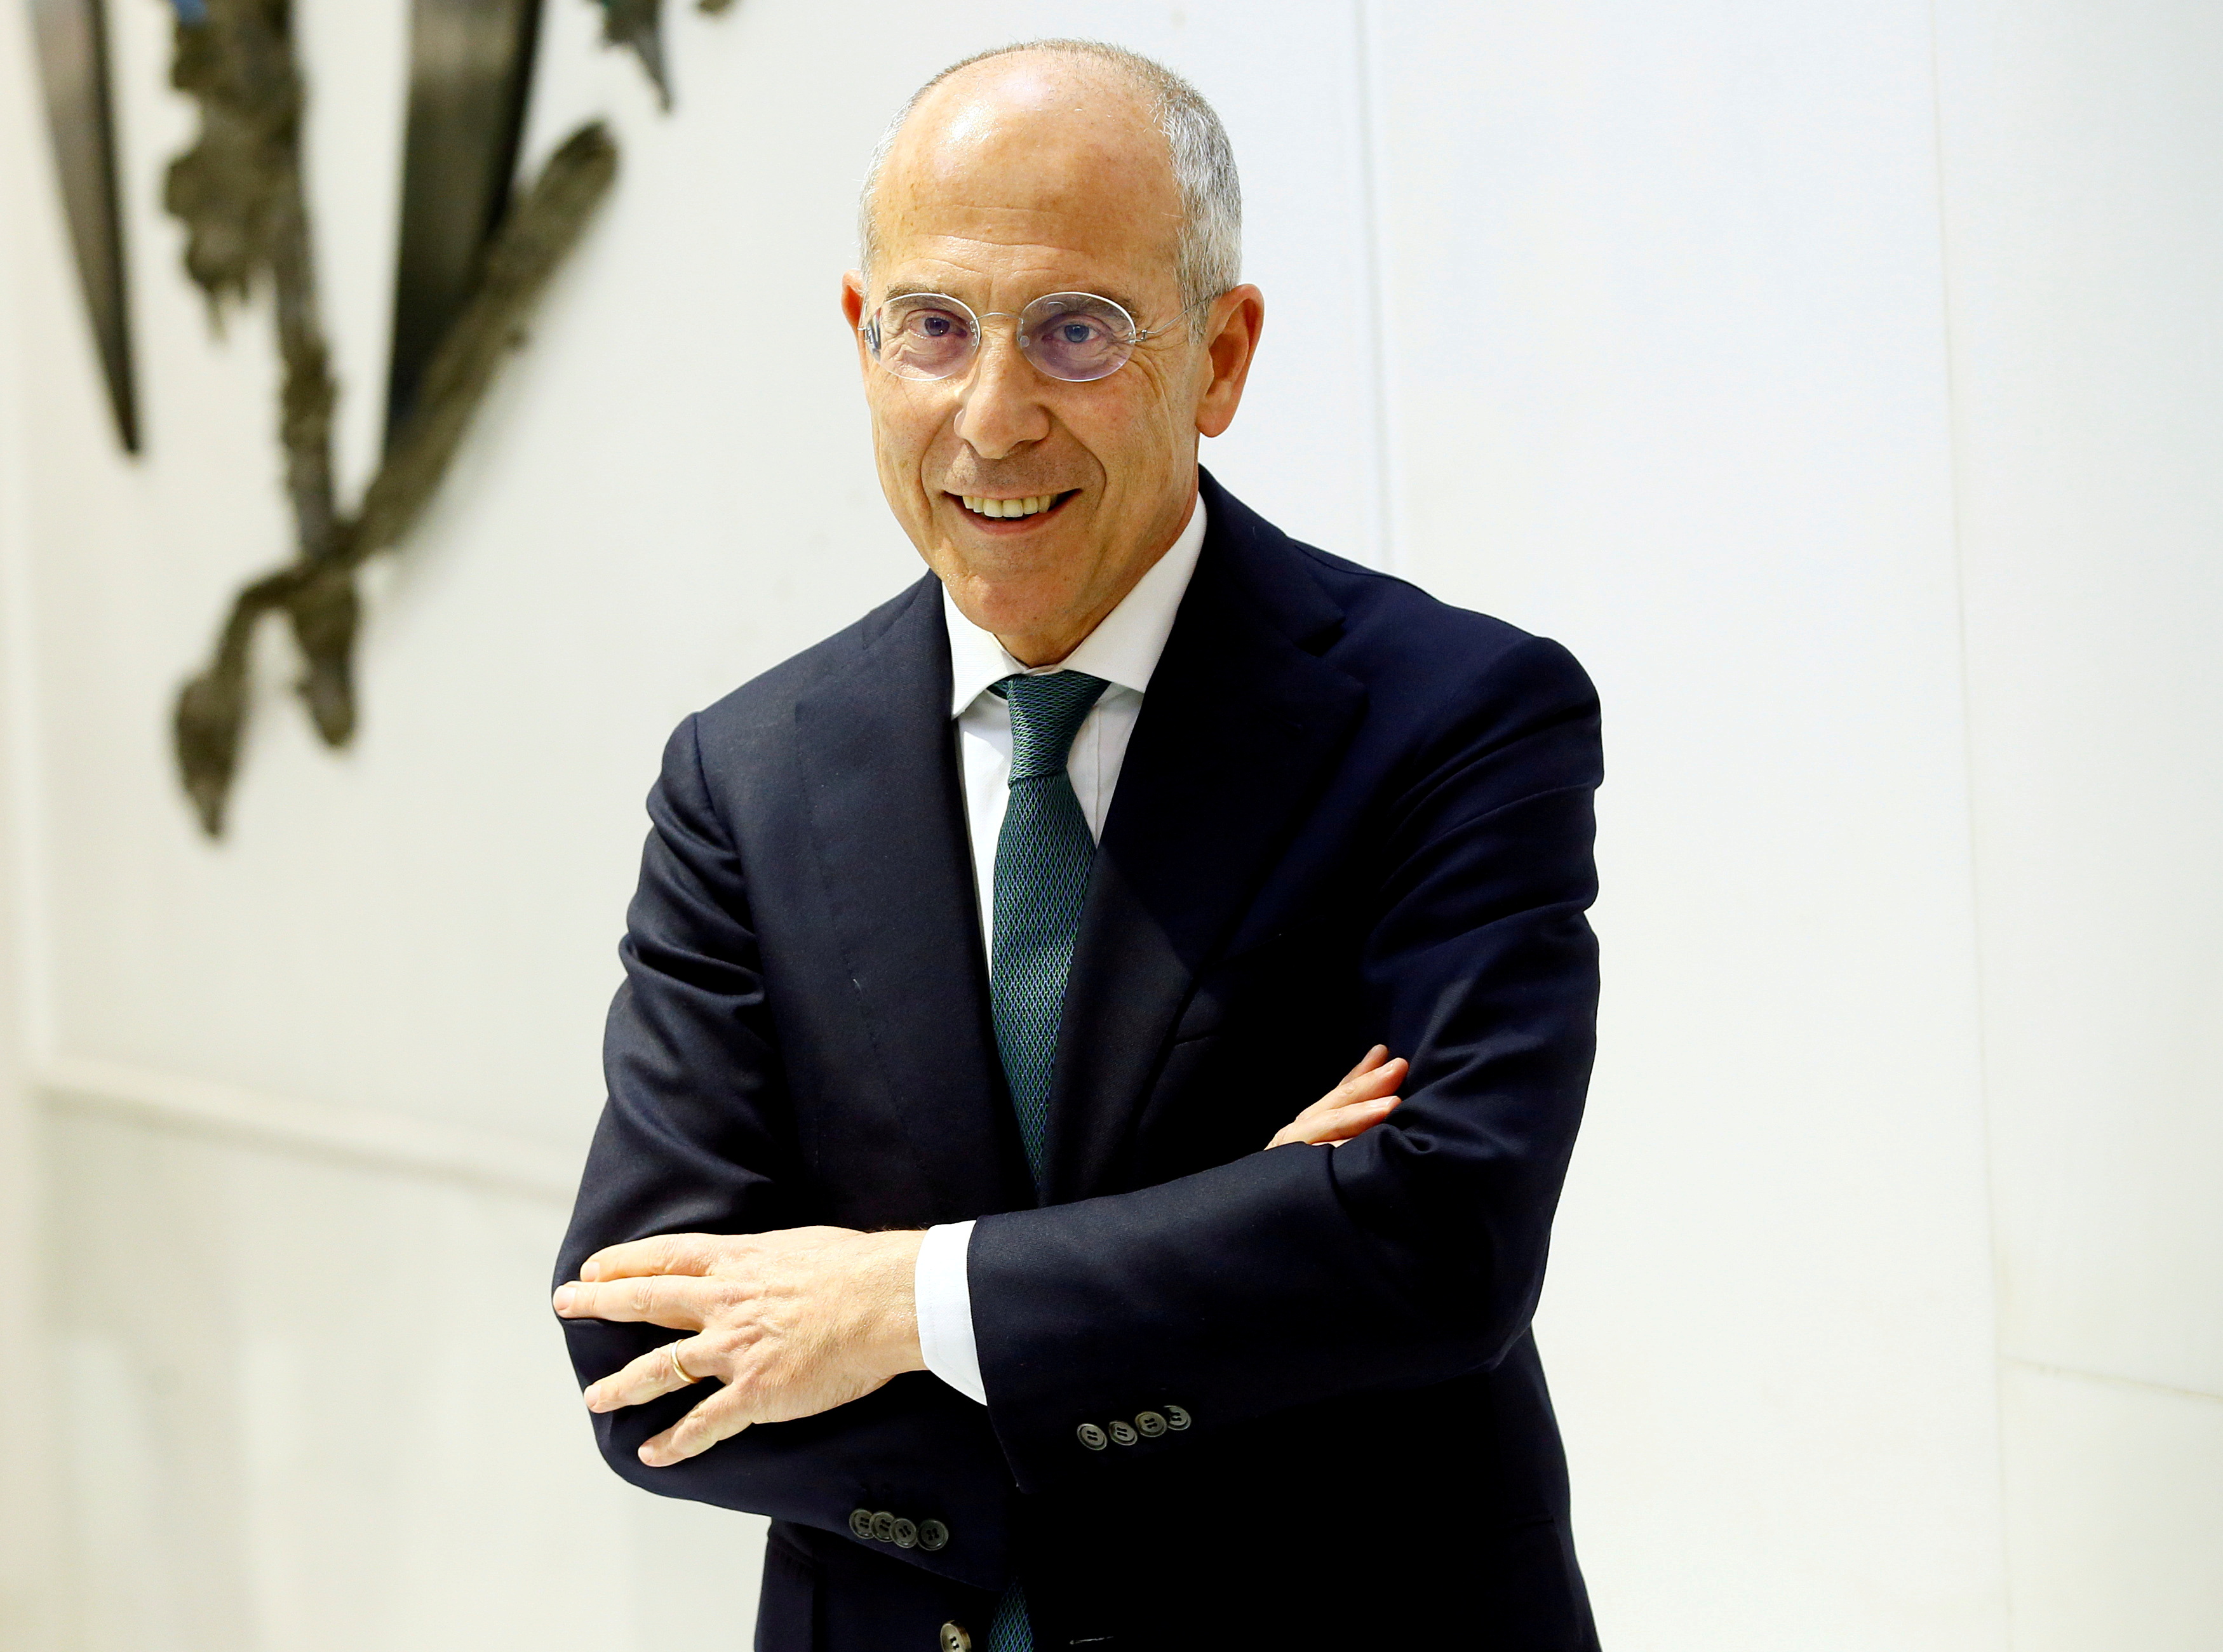 General manager and CEO of Enel Group Francesco Starace poses during 2018 Reuters Breakingviews Predictions event in Milan